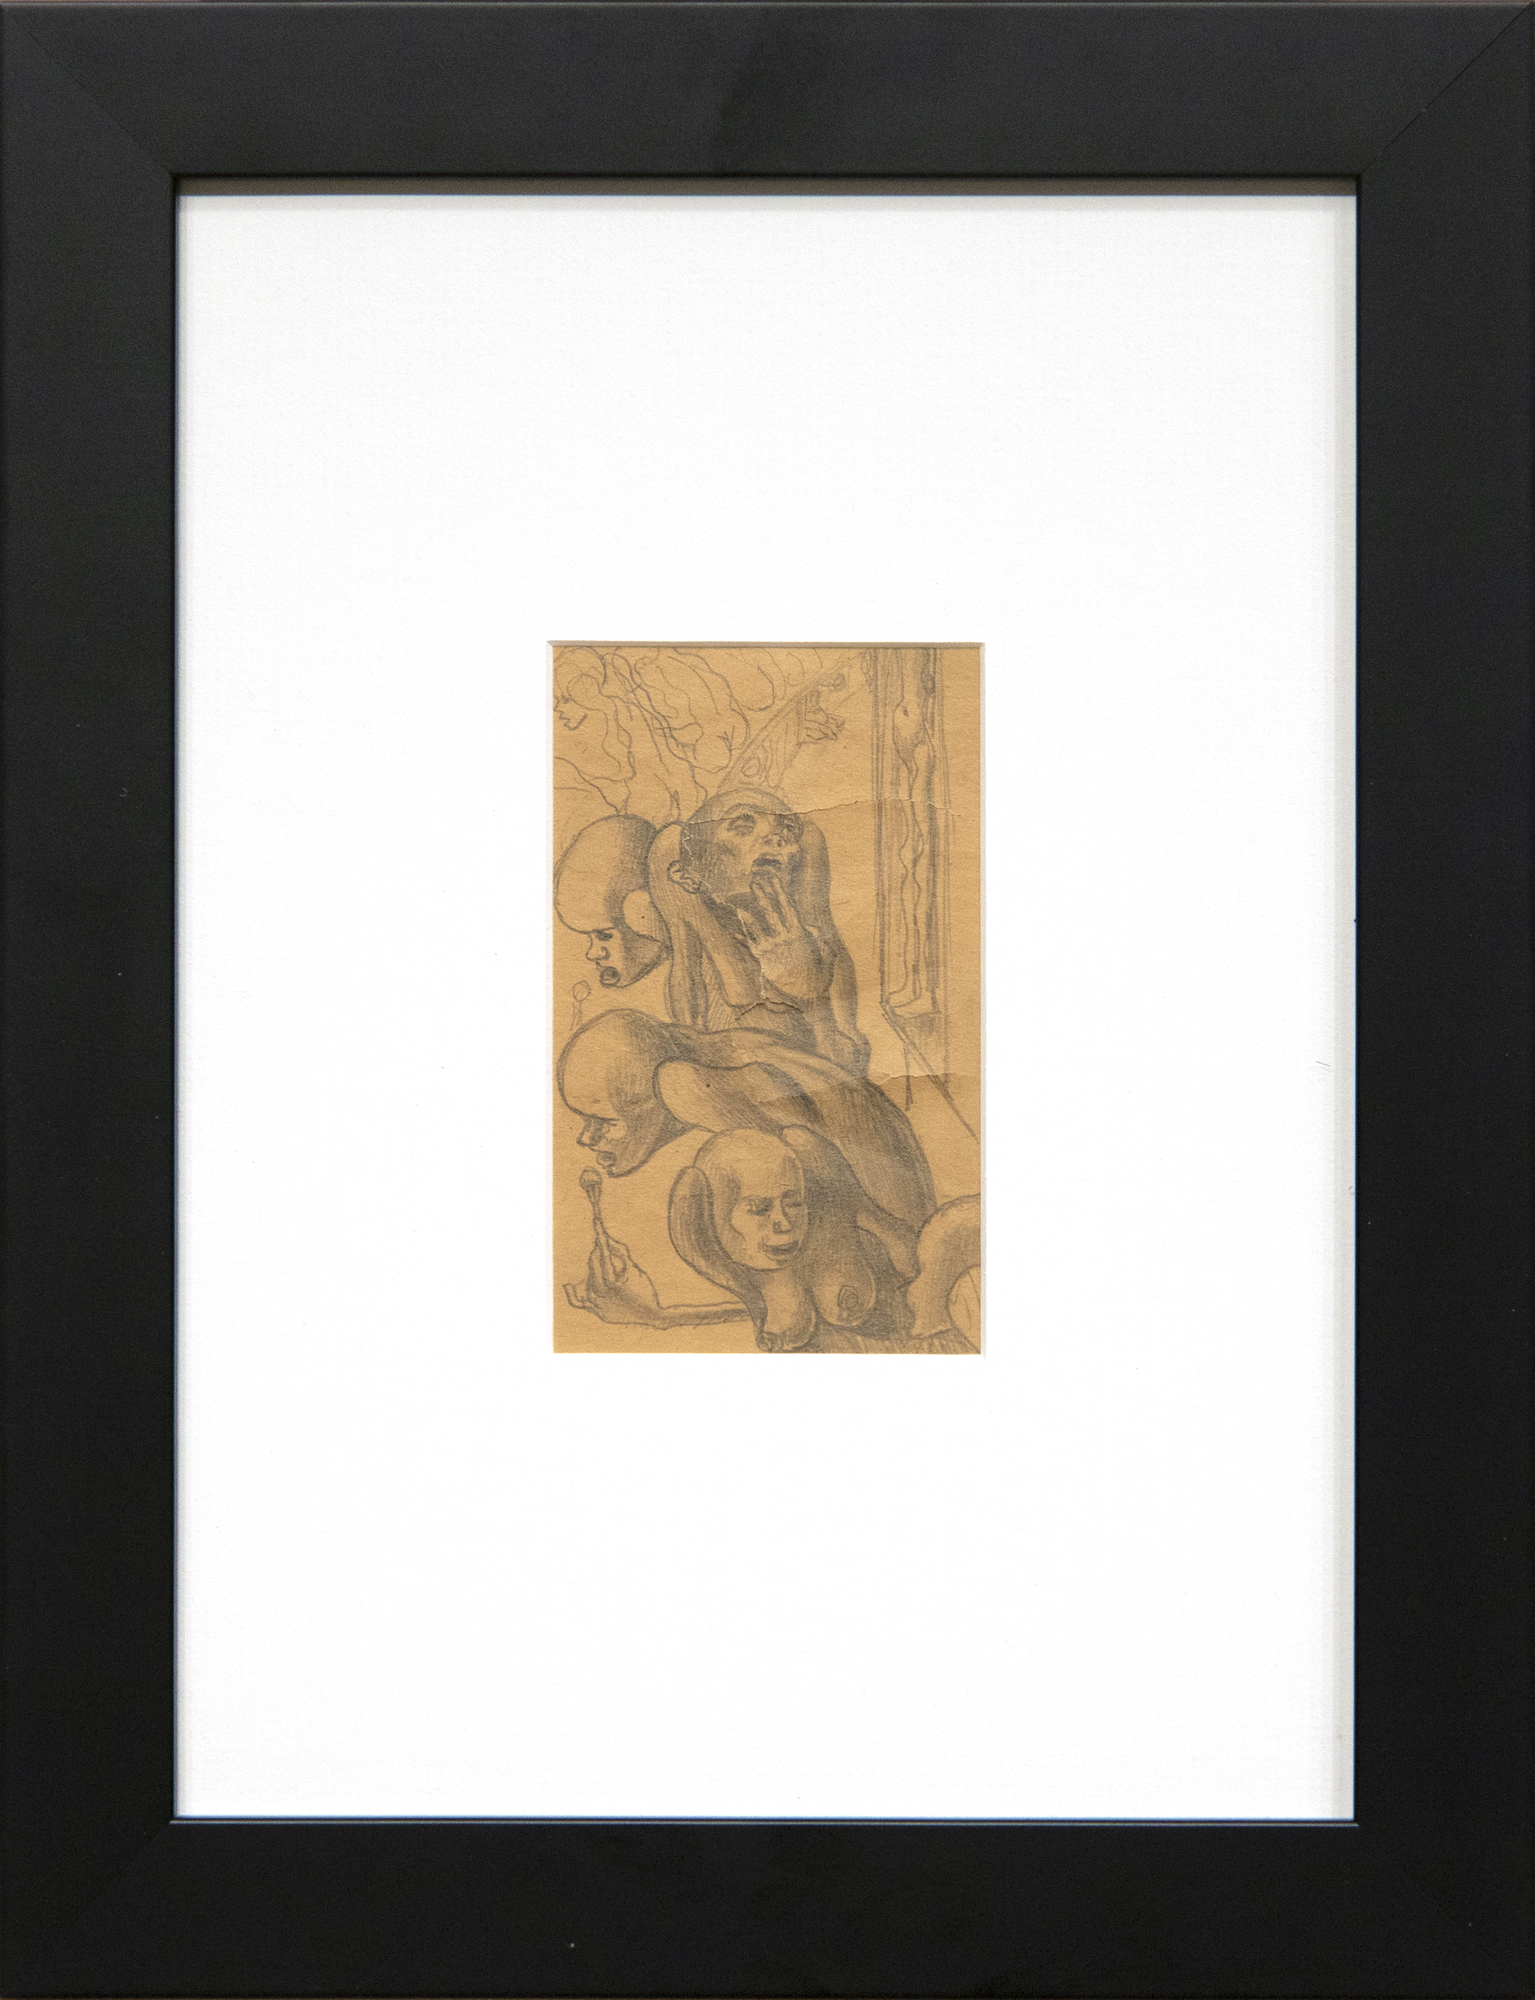 IRVING NORMAN - Untitled (Possible Study for "Celebration") - graphite on paper - 4 7/8 x 3 in.